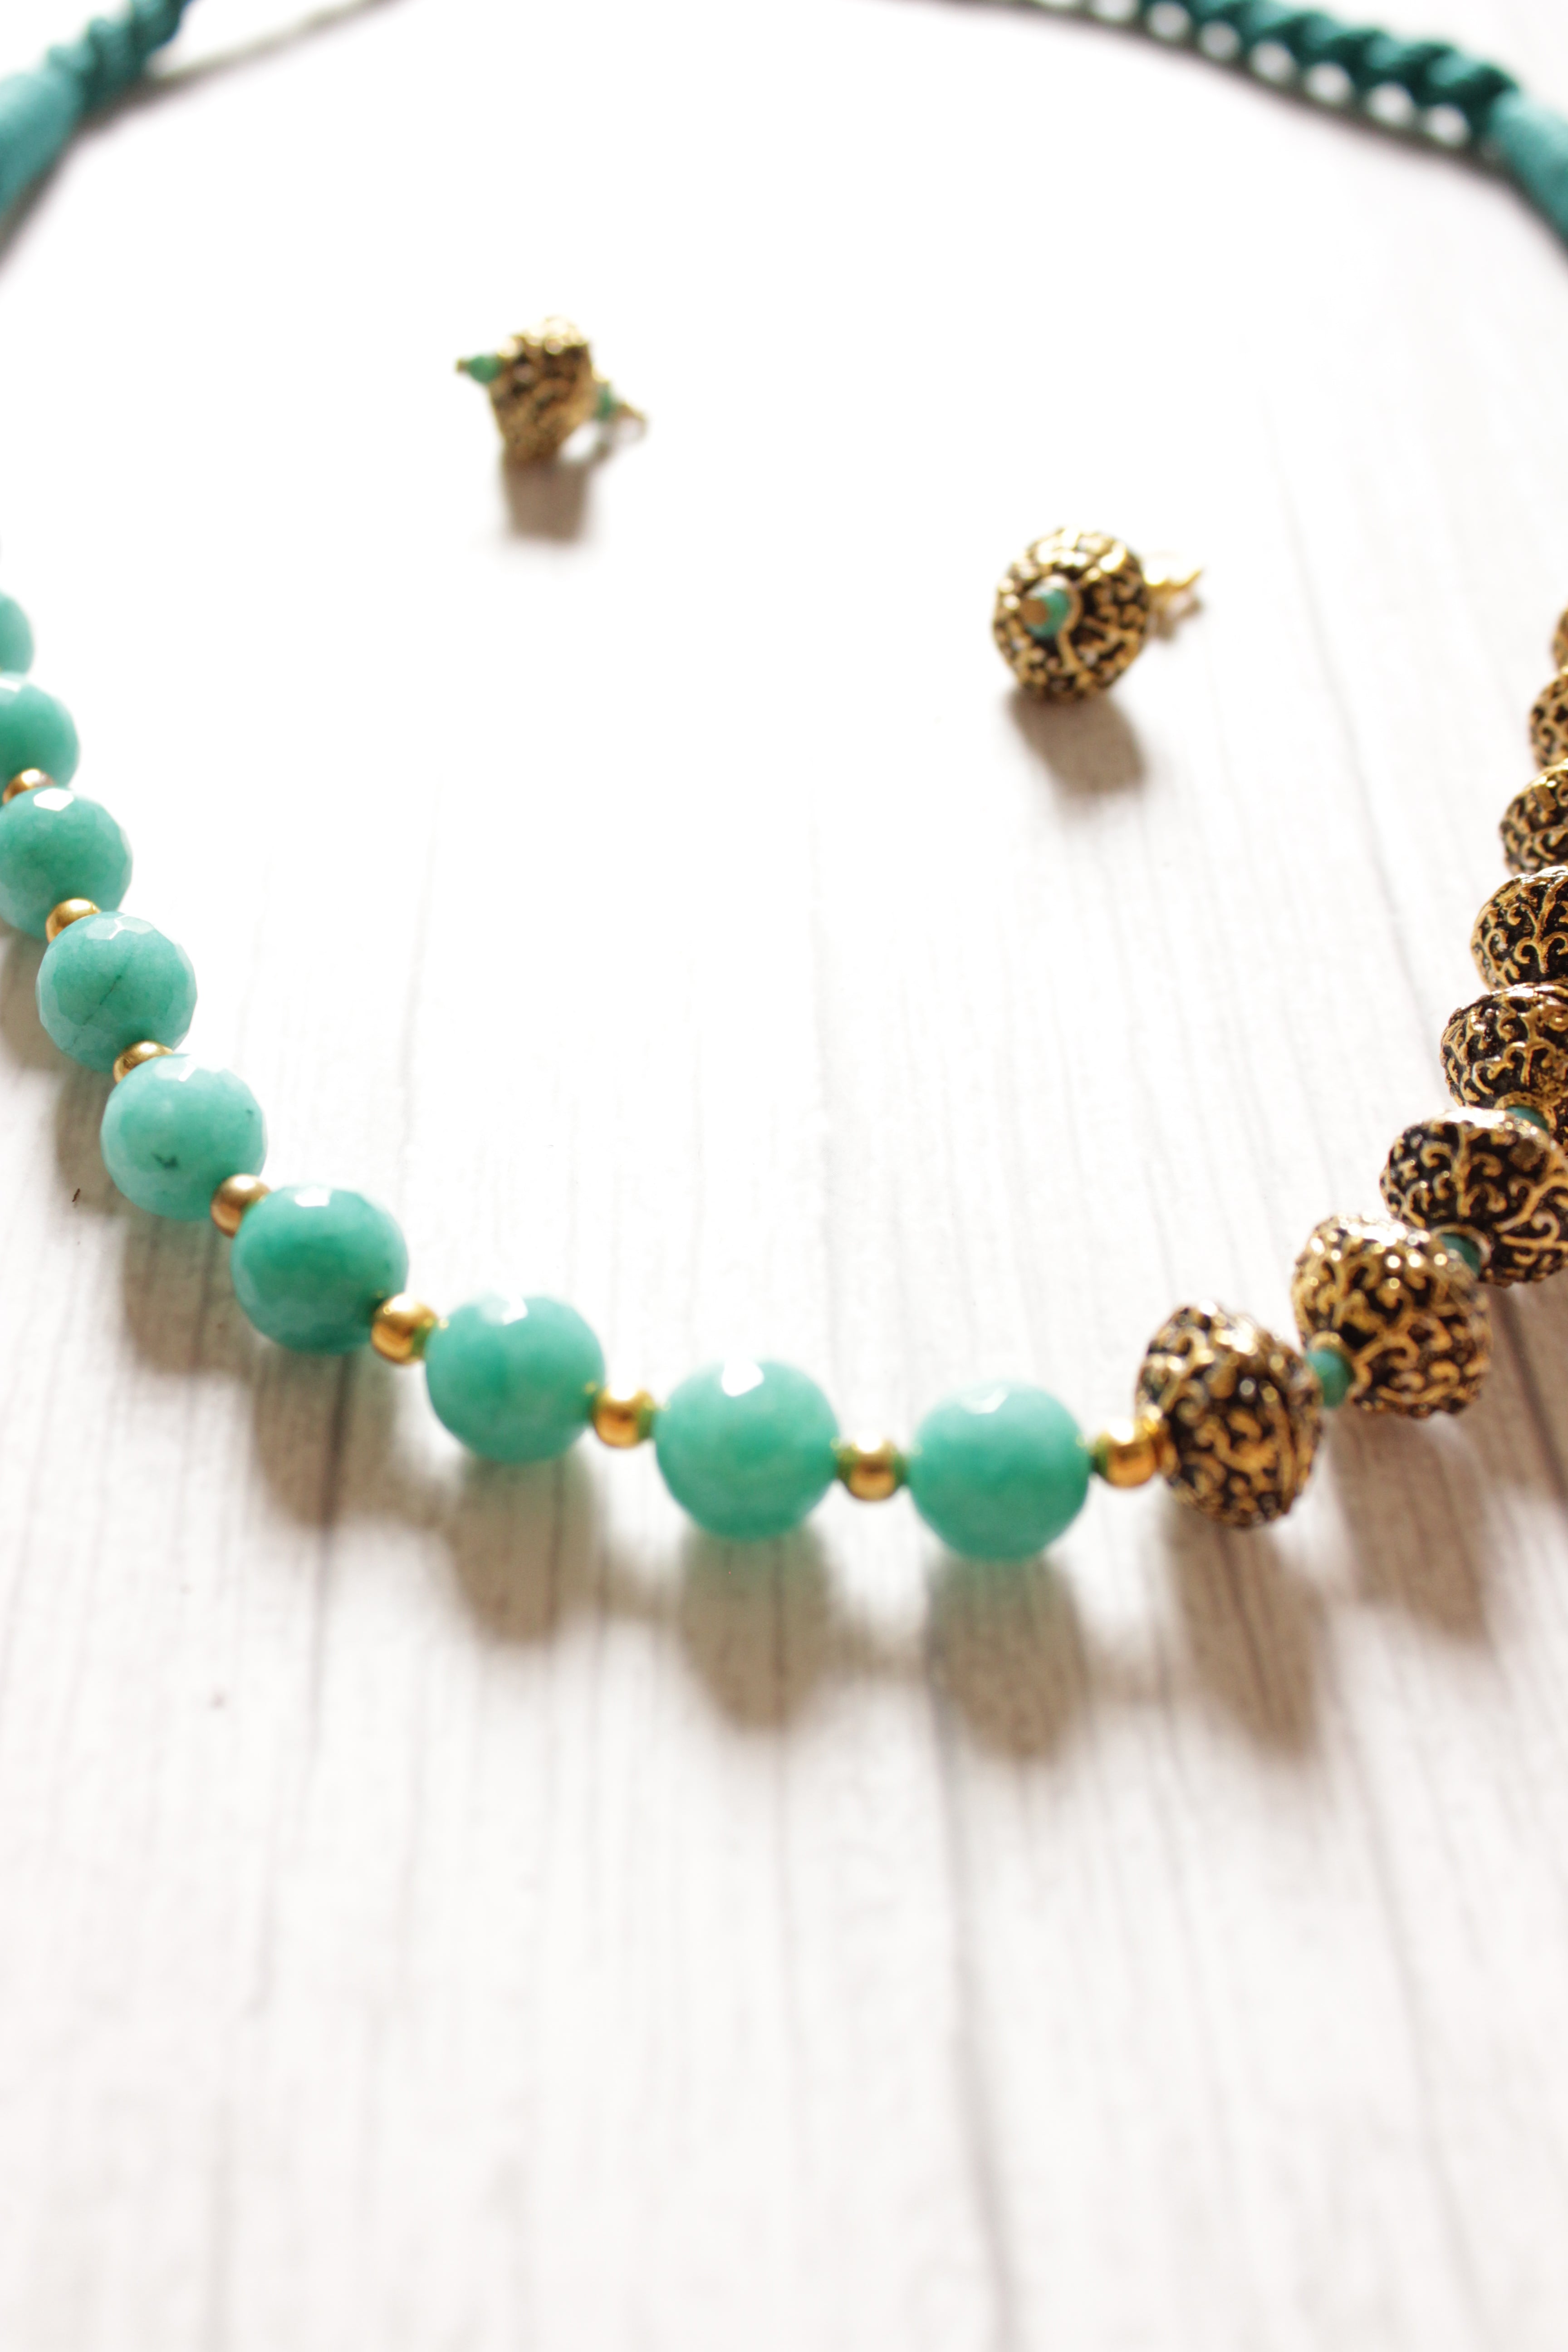 Turquoise and Antique Gold Finish Metal Beads Necklace Set